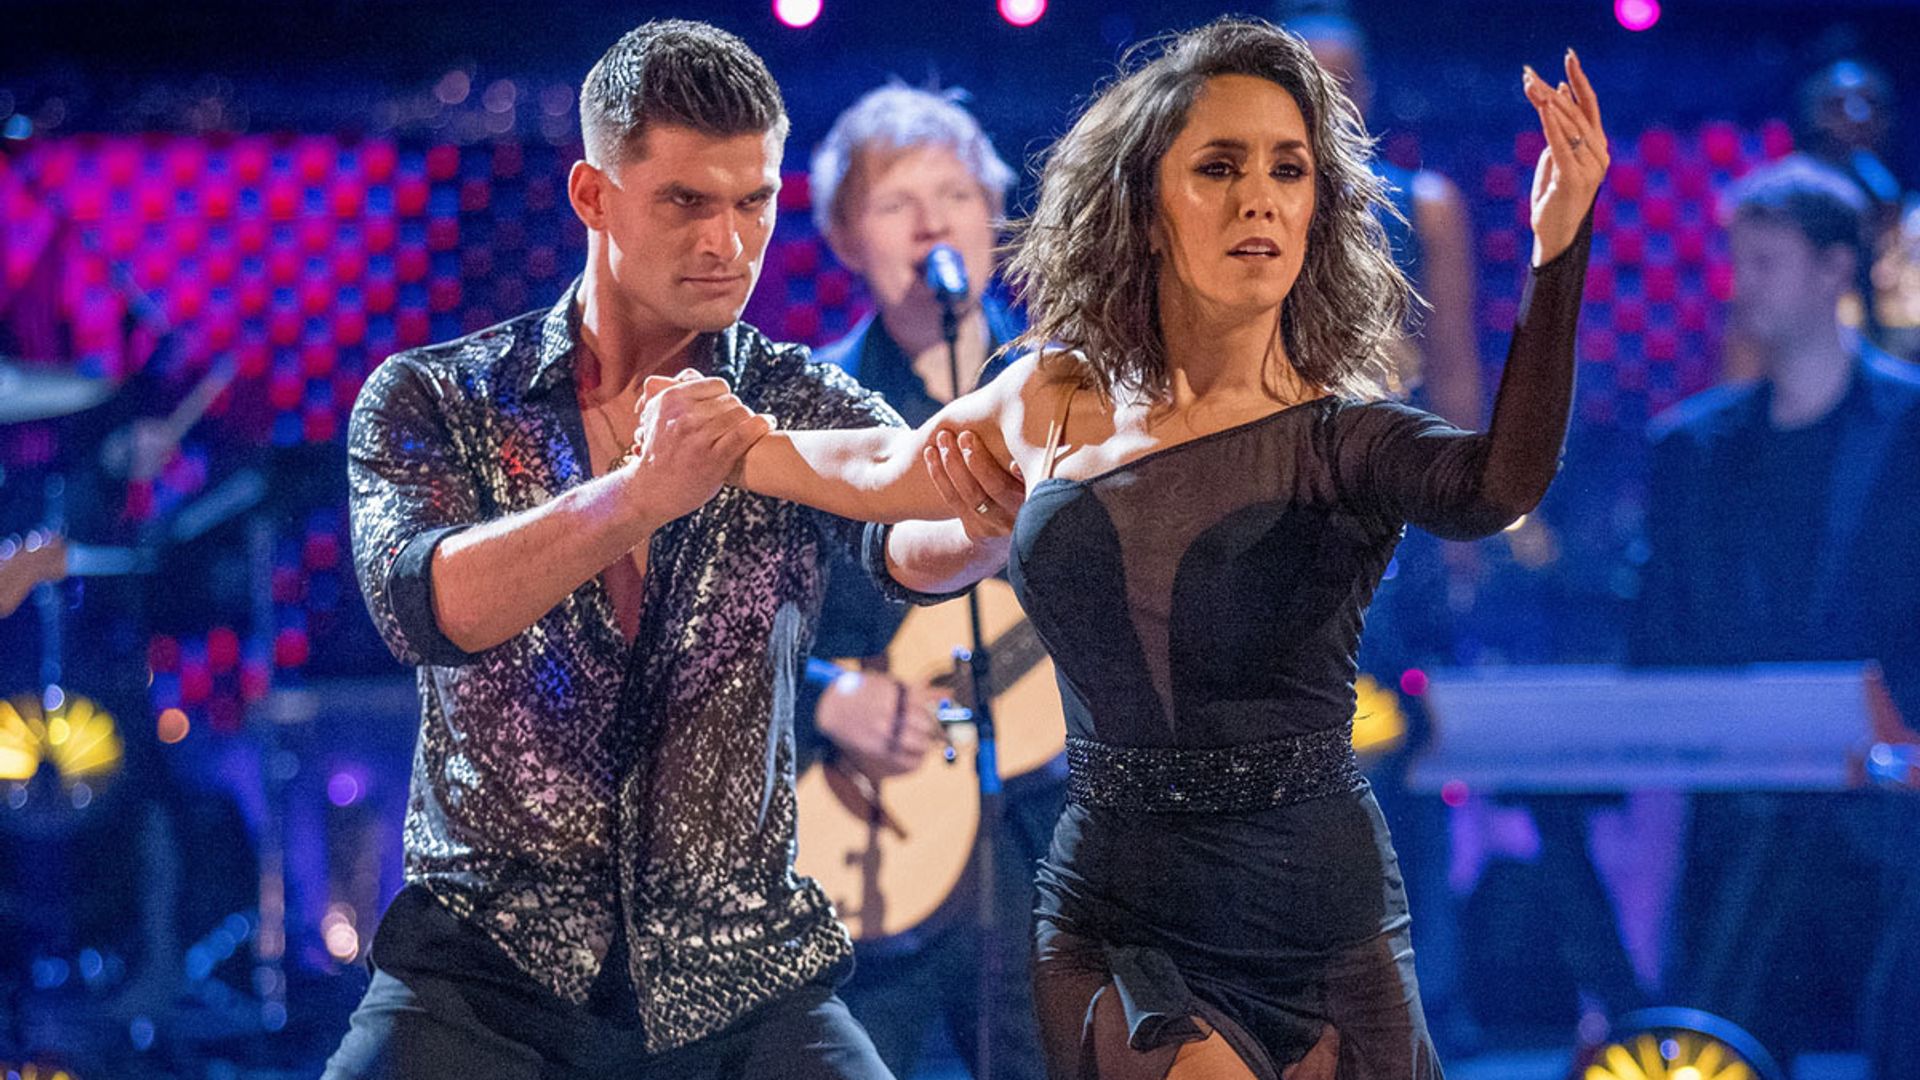 Strictly's Janette Manrara reveals where husband Aljaz proposed in romantic post